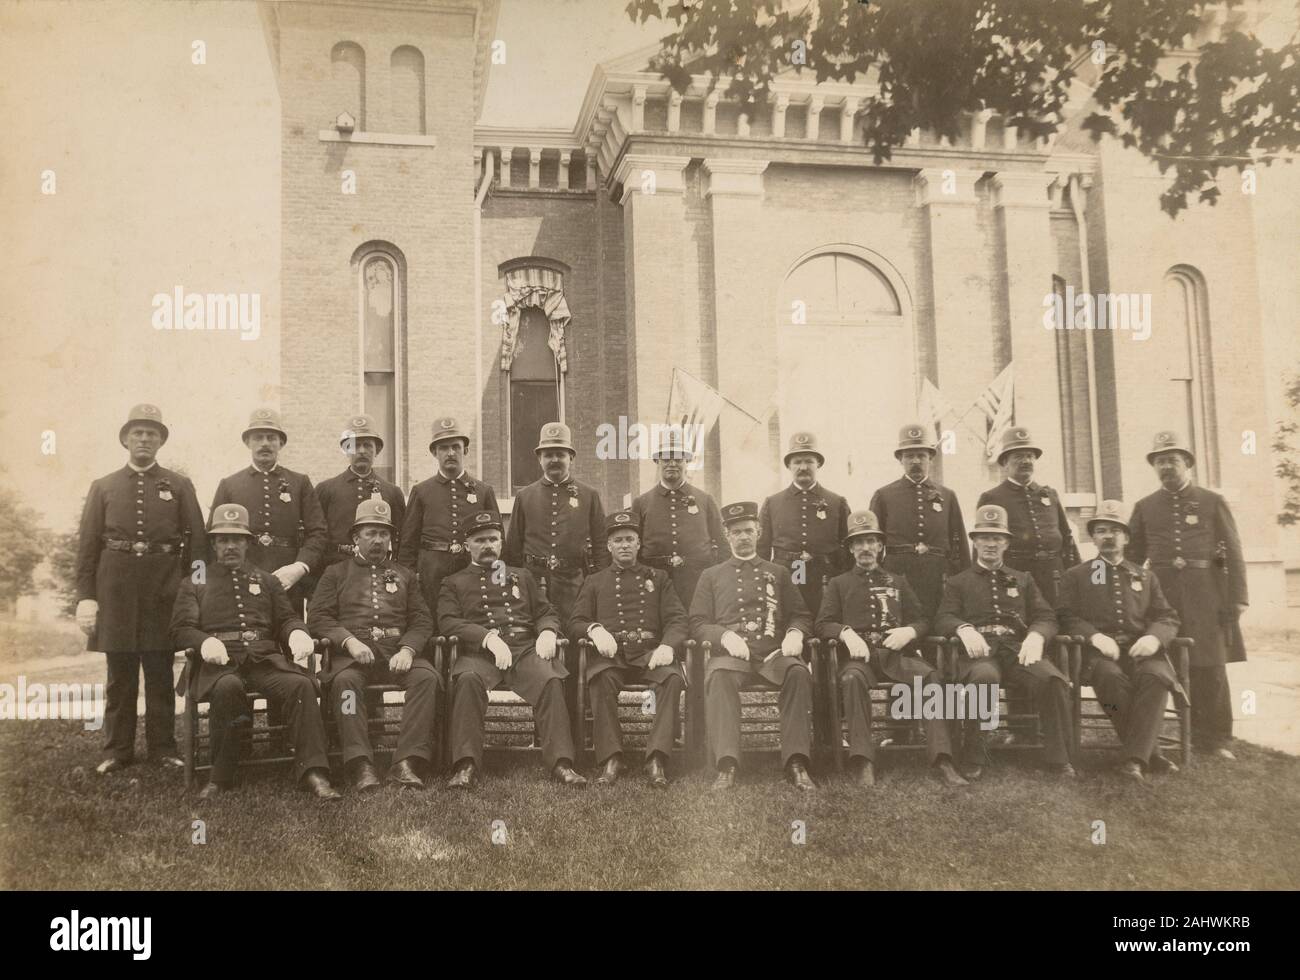 Antique 1891 photograph, “Binghamton, New York Police Force – 1891 – average weight 216.75 pounds.”  SOURCE: ORIGINAL PHOTOGRAPH Stock Photo